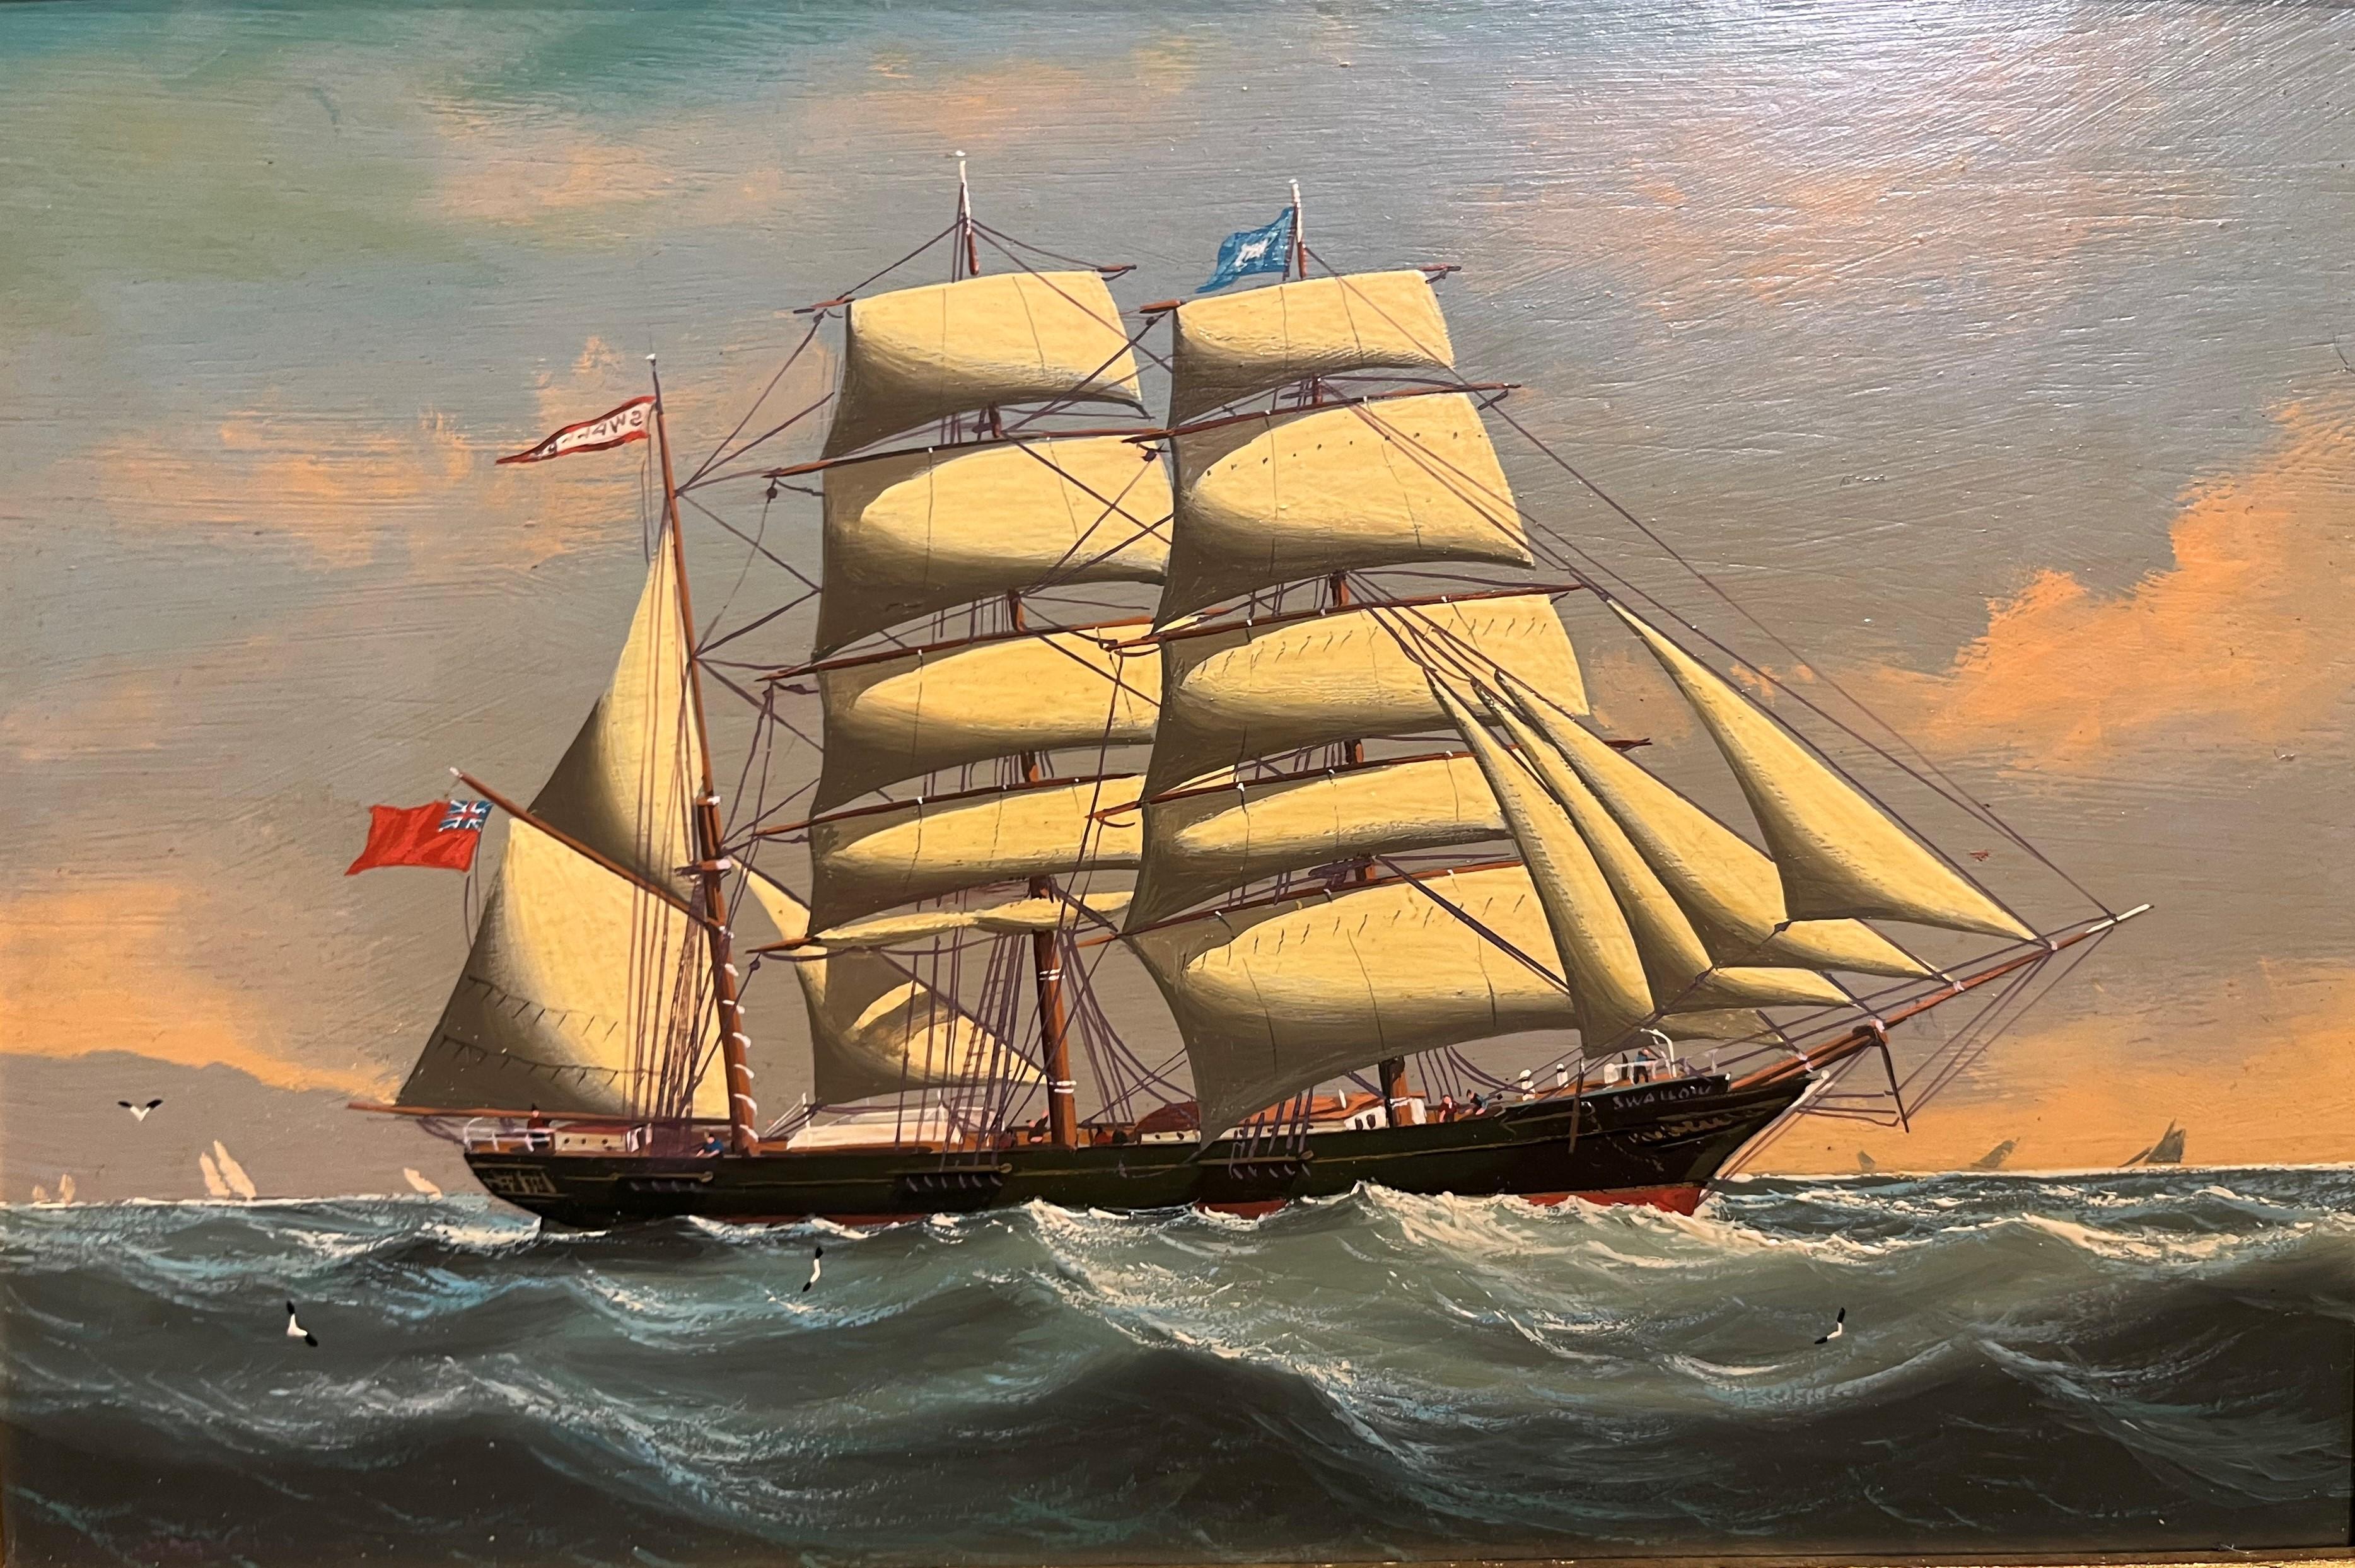 OIL PAINTING Small by SALVATORE COLACICCO (NAVY ADMIRALTY 20th CENTURY PIECE  - Realist Painting by Salvatore Colacicco